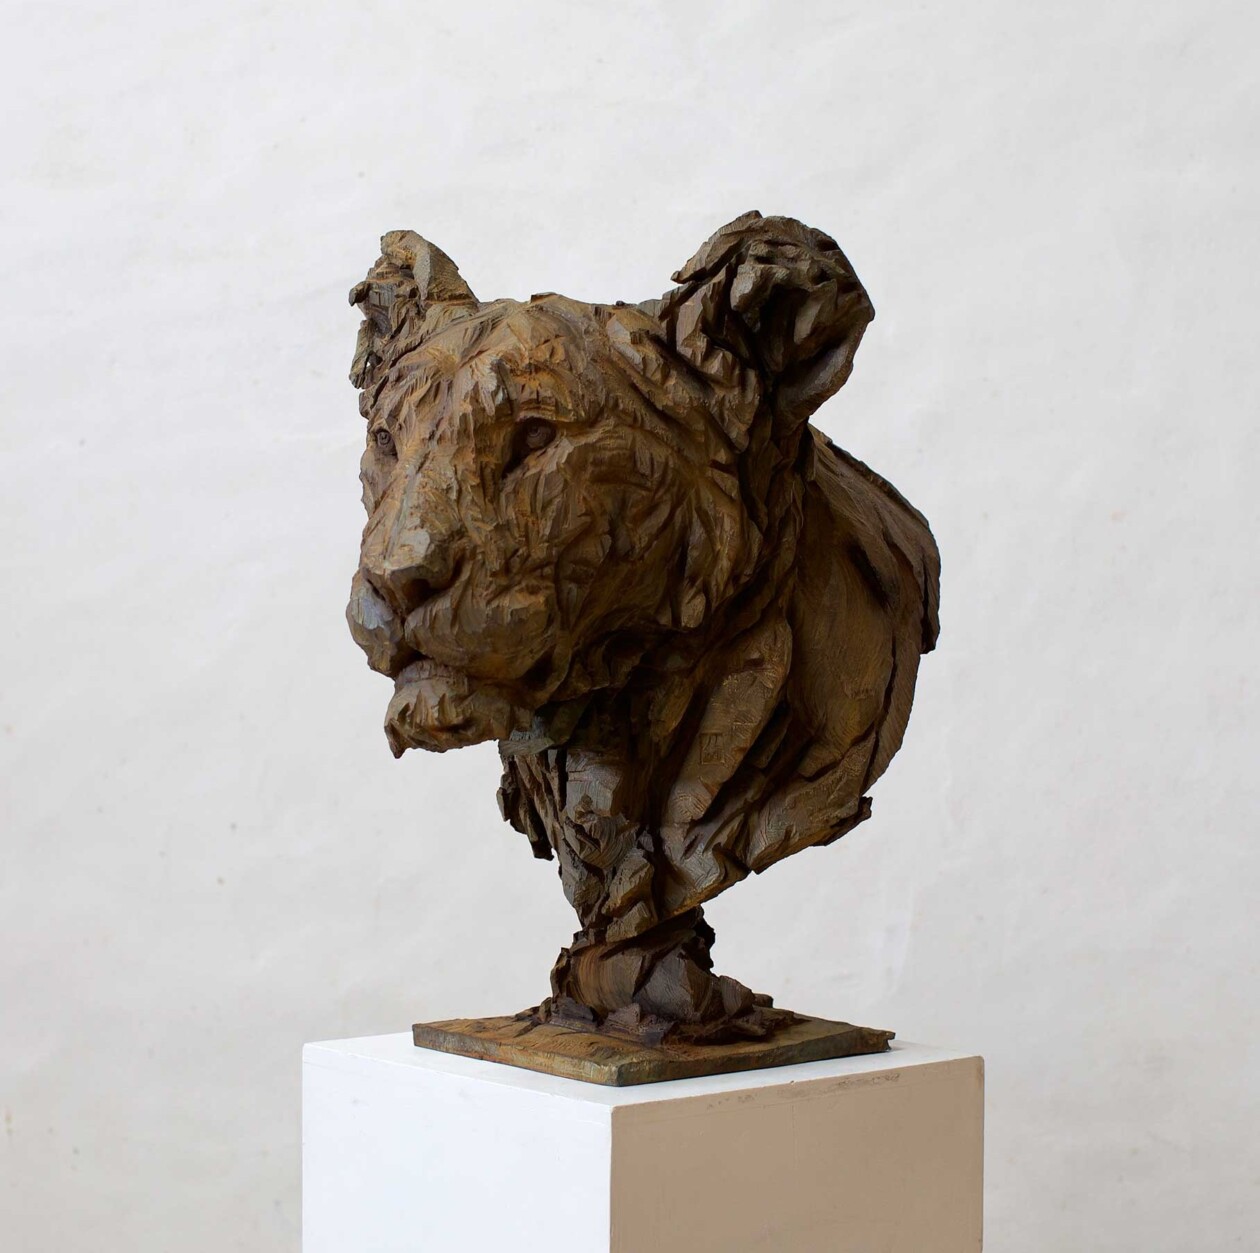 Jürgen Lingl Hand Carves Precise And Textured Figurative Sculptures From Wood (1)